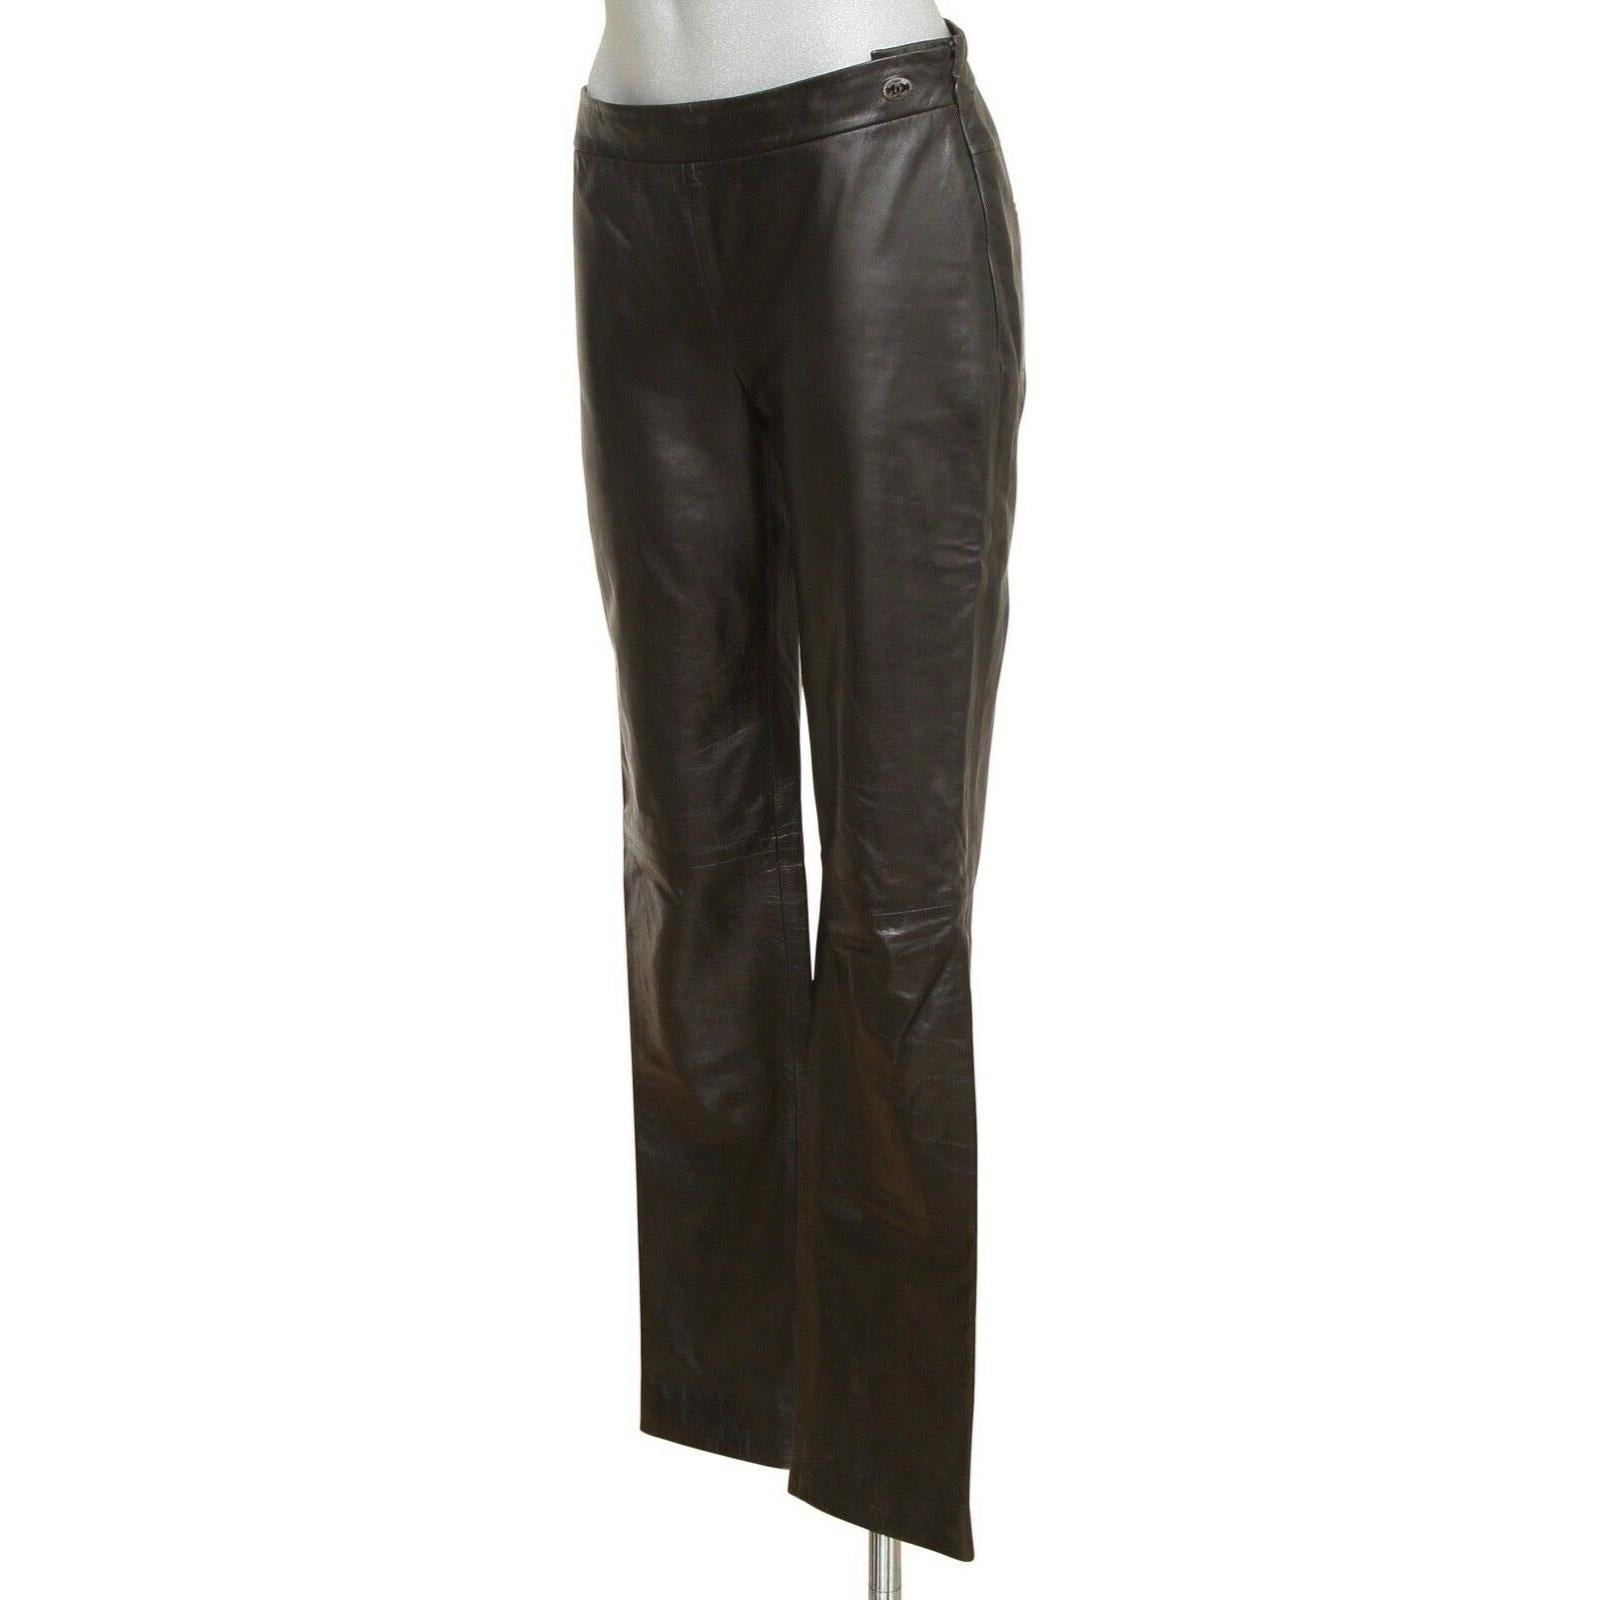 CHANEL Black Leather Pant Lambskin Straight Leg Pockets Side Zipper Sz 38 In Good Condition For Sale In Hollywood, FL